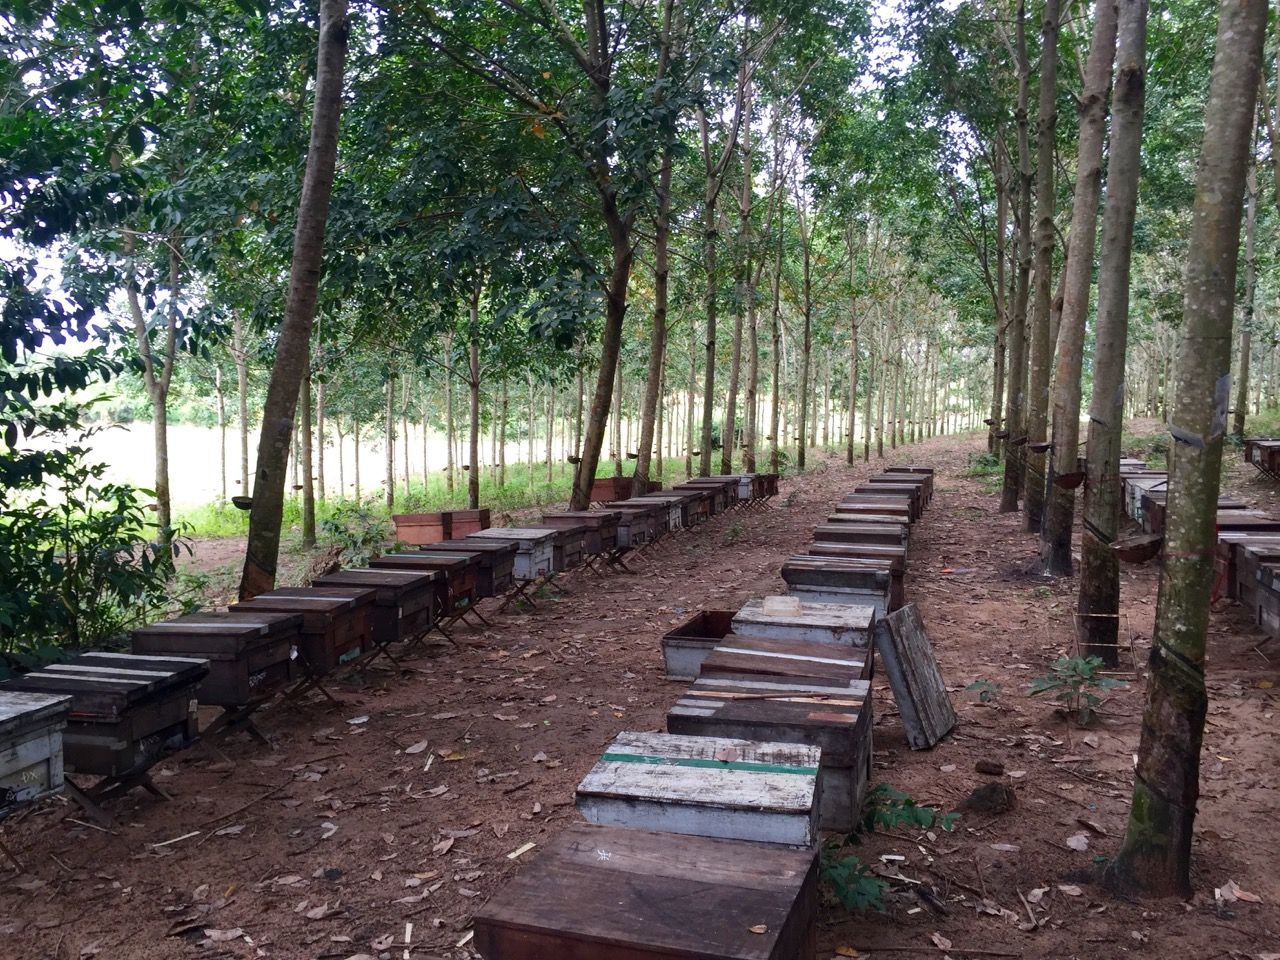 Rows of beehives and rubber trees.